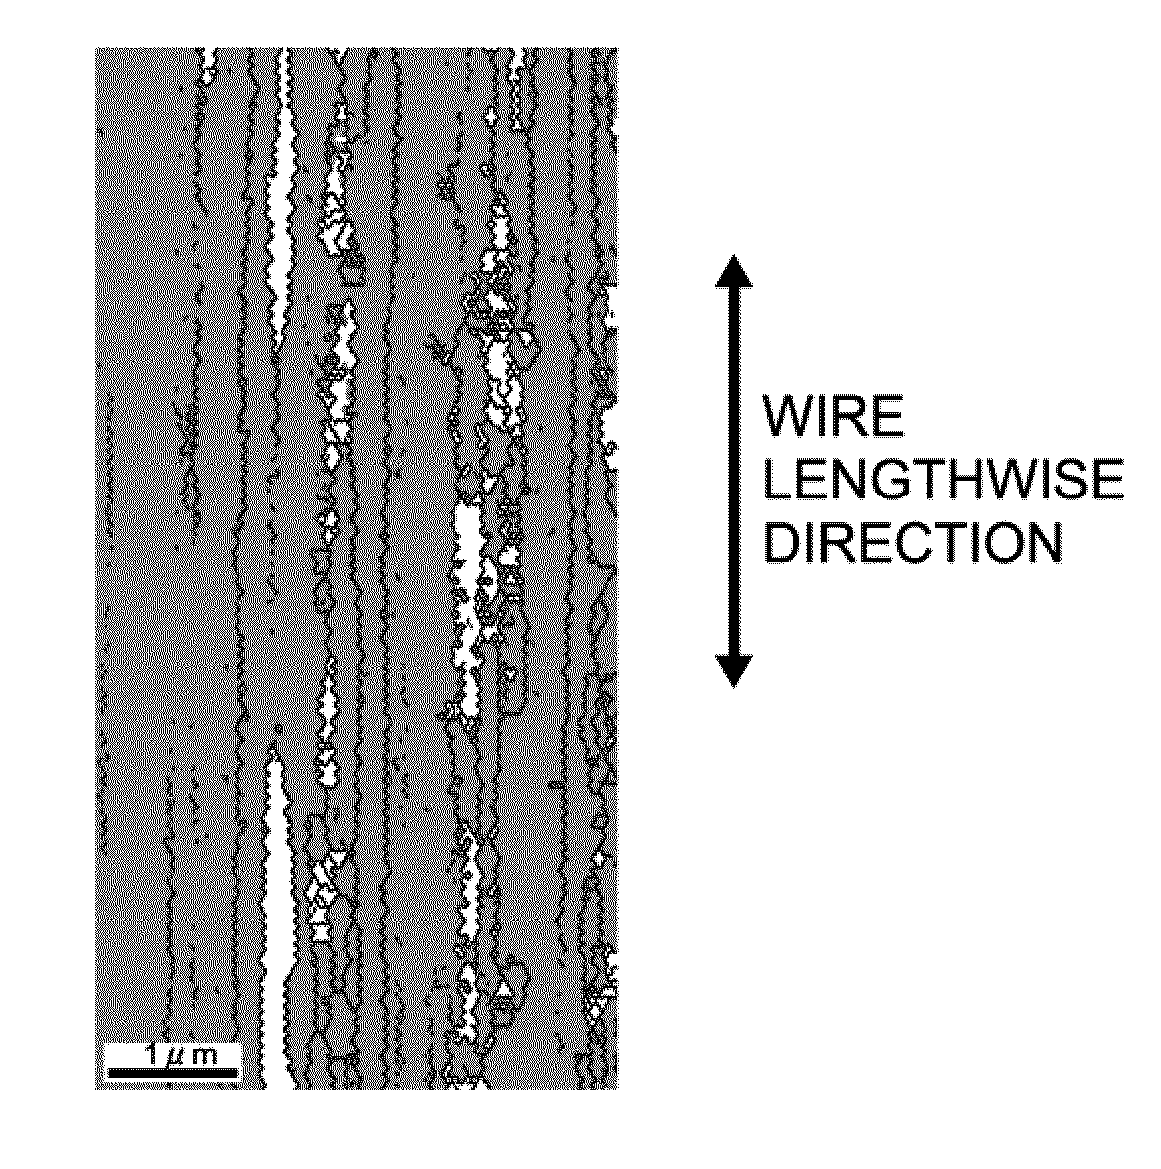 Bonding wire for semiconductor devices